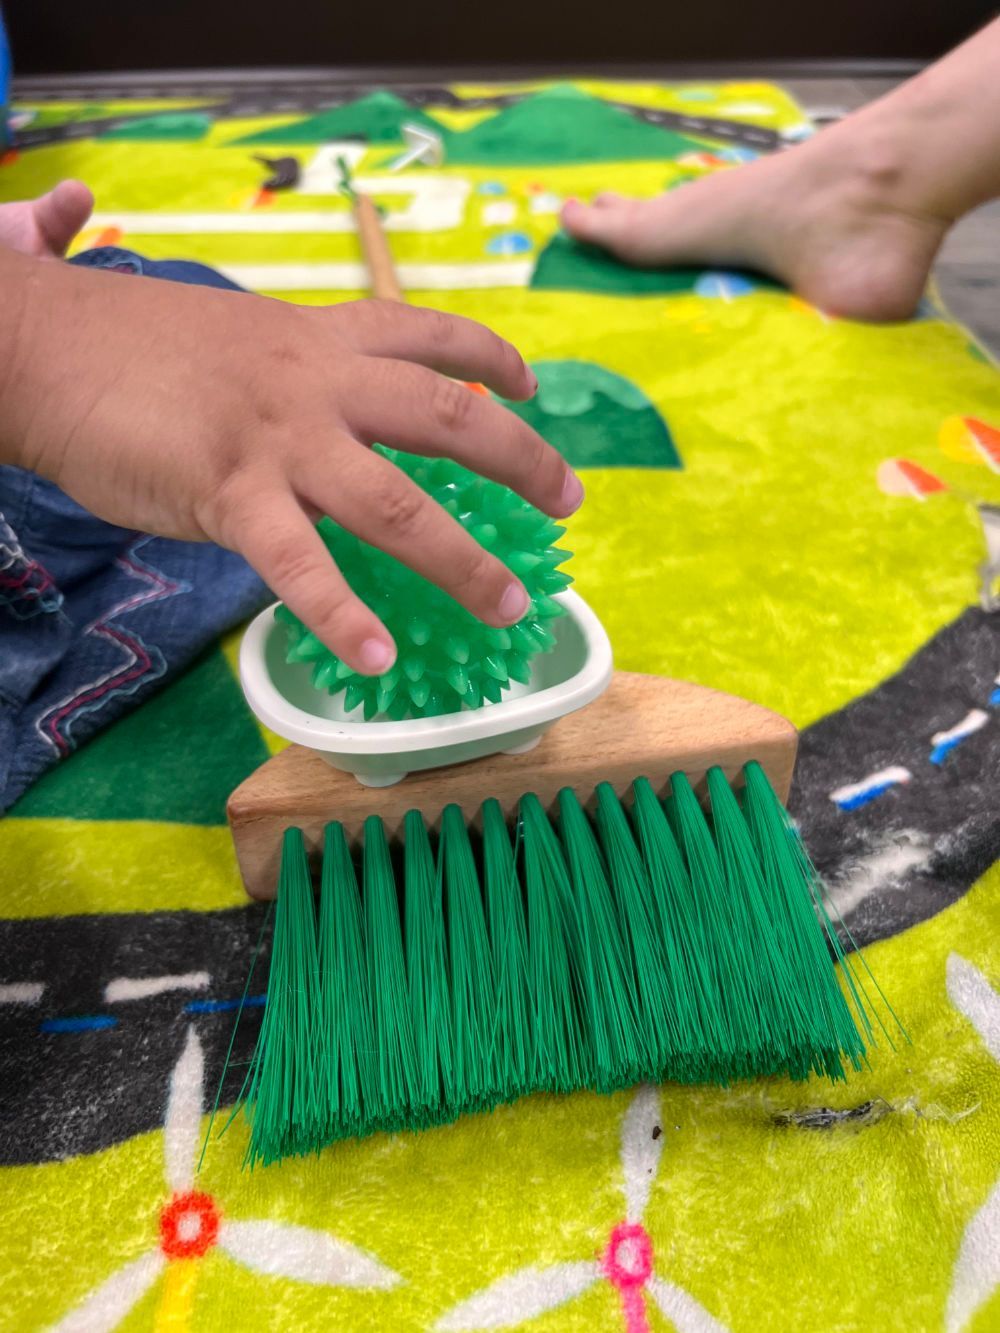 A child is playing with a green brush and a green ball.